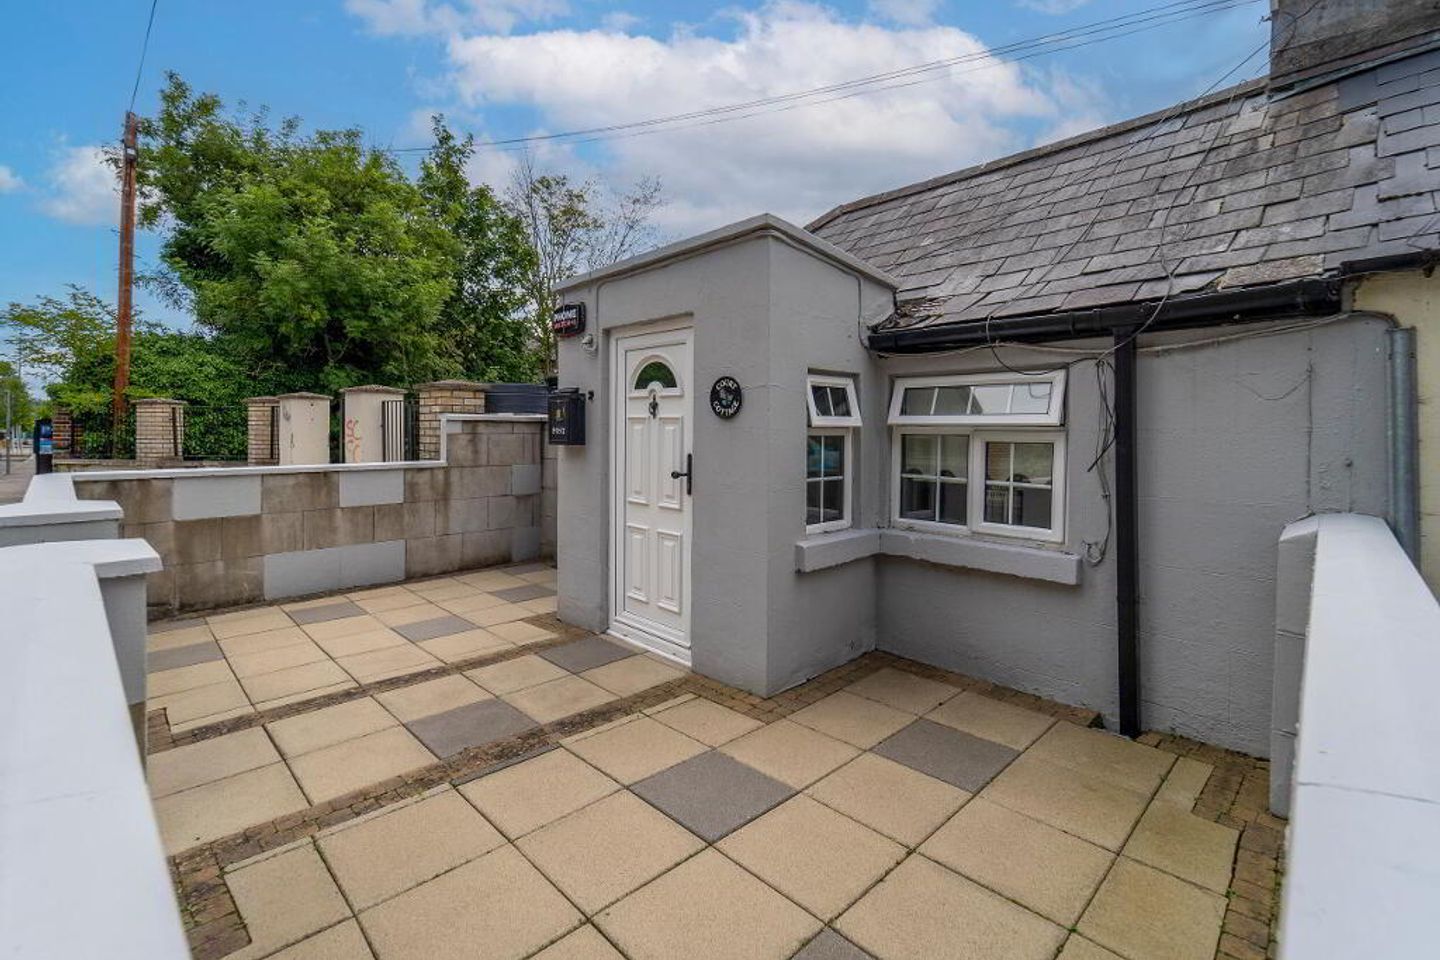 Court Cottage, Greenhills Road, Tallaght, Dublin 24, D24VPY5